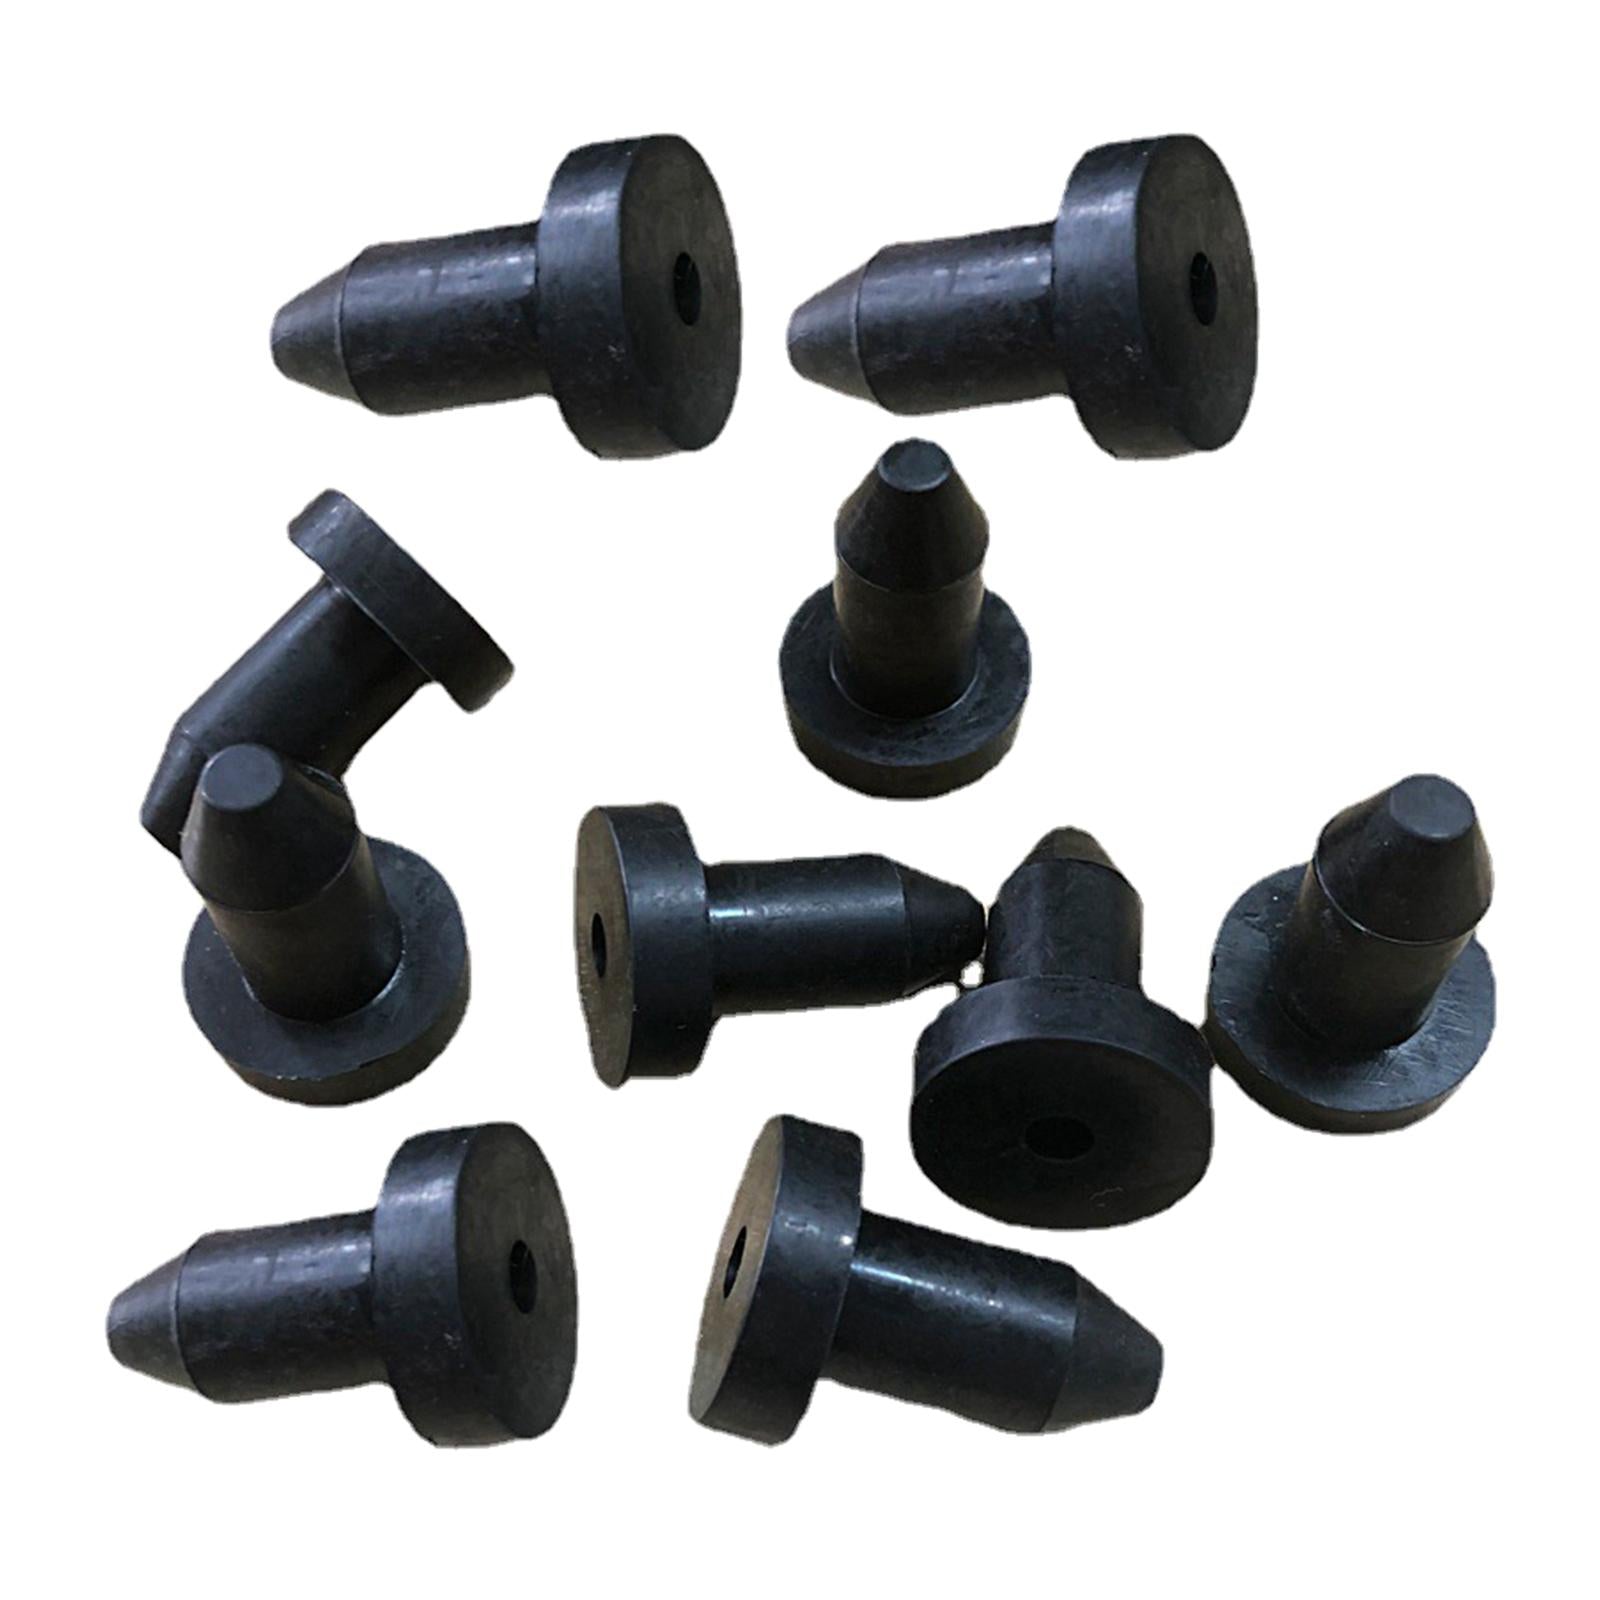 10pcs Kayak Drain Plugs Stoppers for Excurion 10 Pedal Boats Replacement